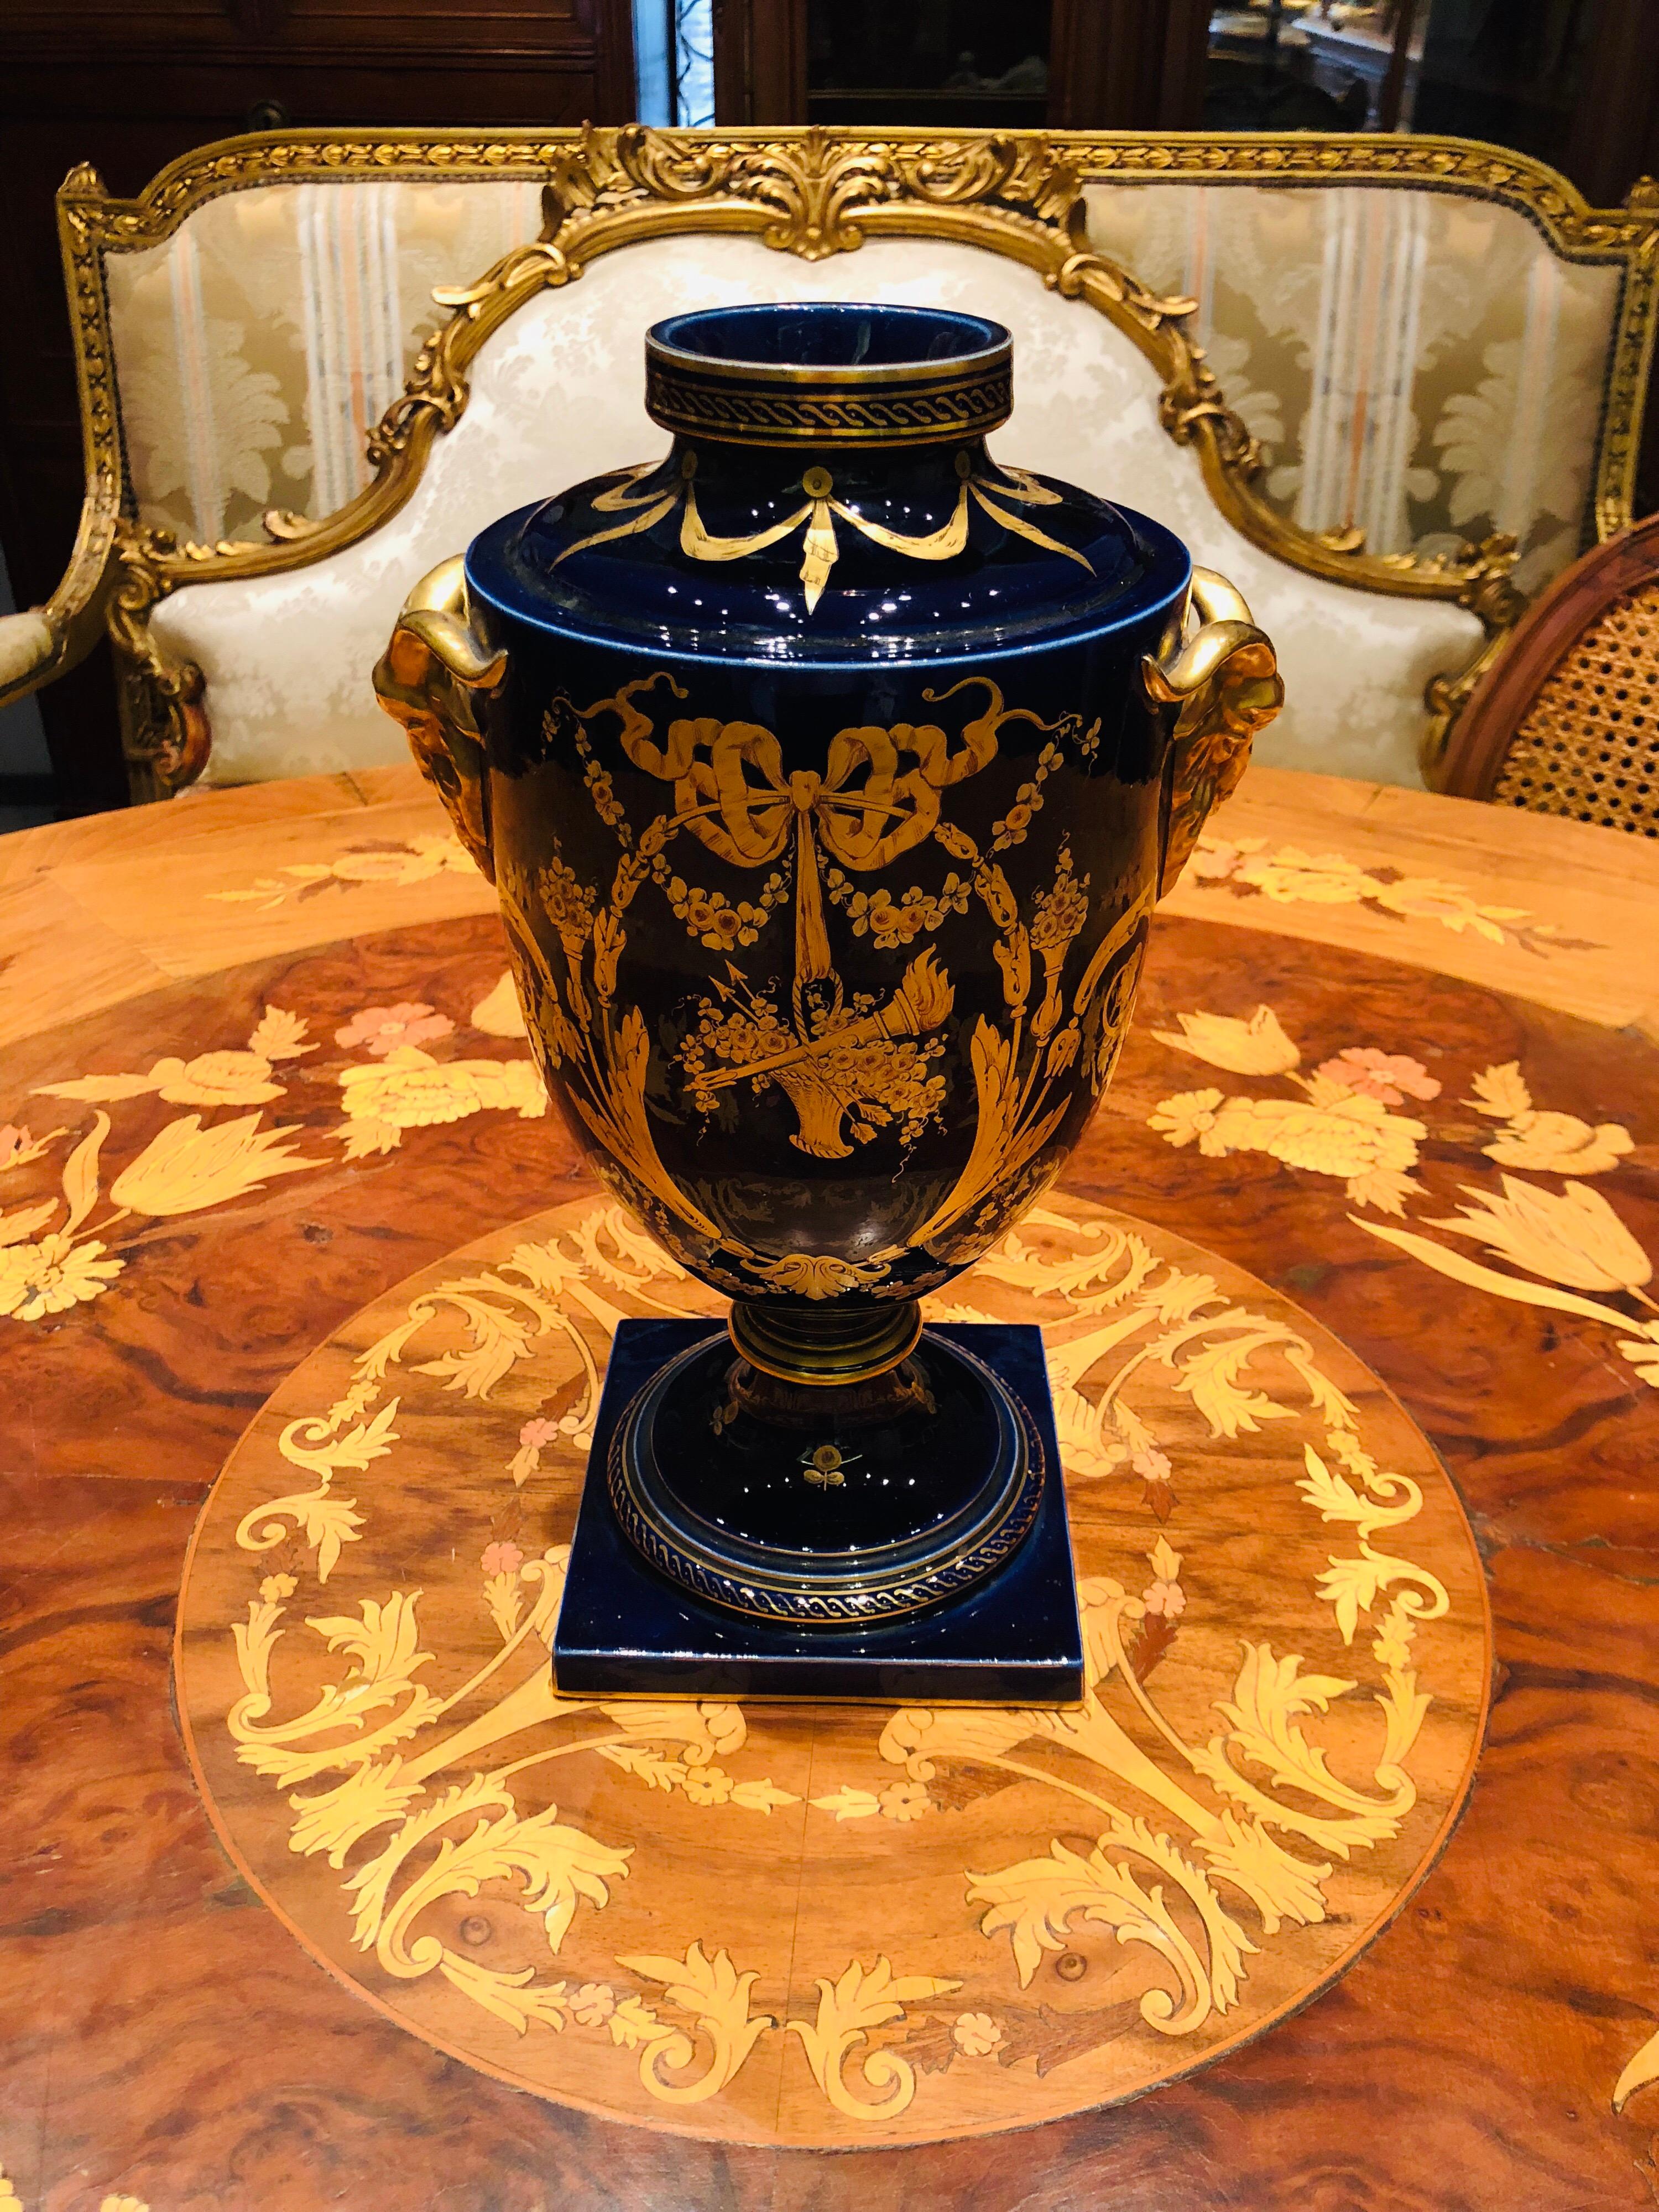 Amphora-shaped vase and in the Empire style, circa 1920, France made of earthenware with a marine-blue background with gold decorations in the spirit of Sèvres. Round neck surrounded by gold, and frieze inlays, recalling the main theme. Also gilded